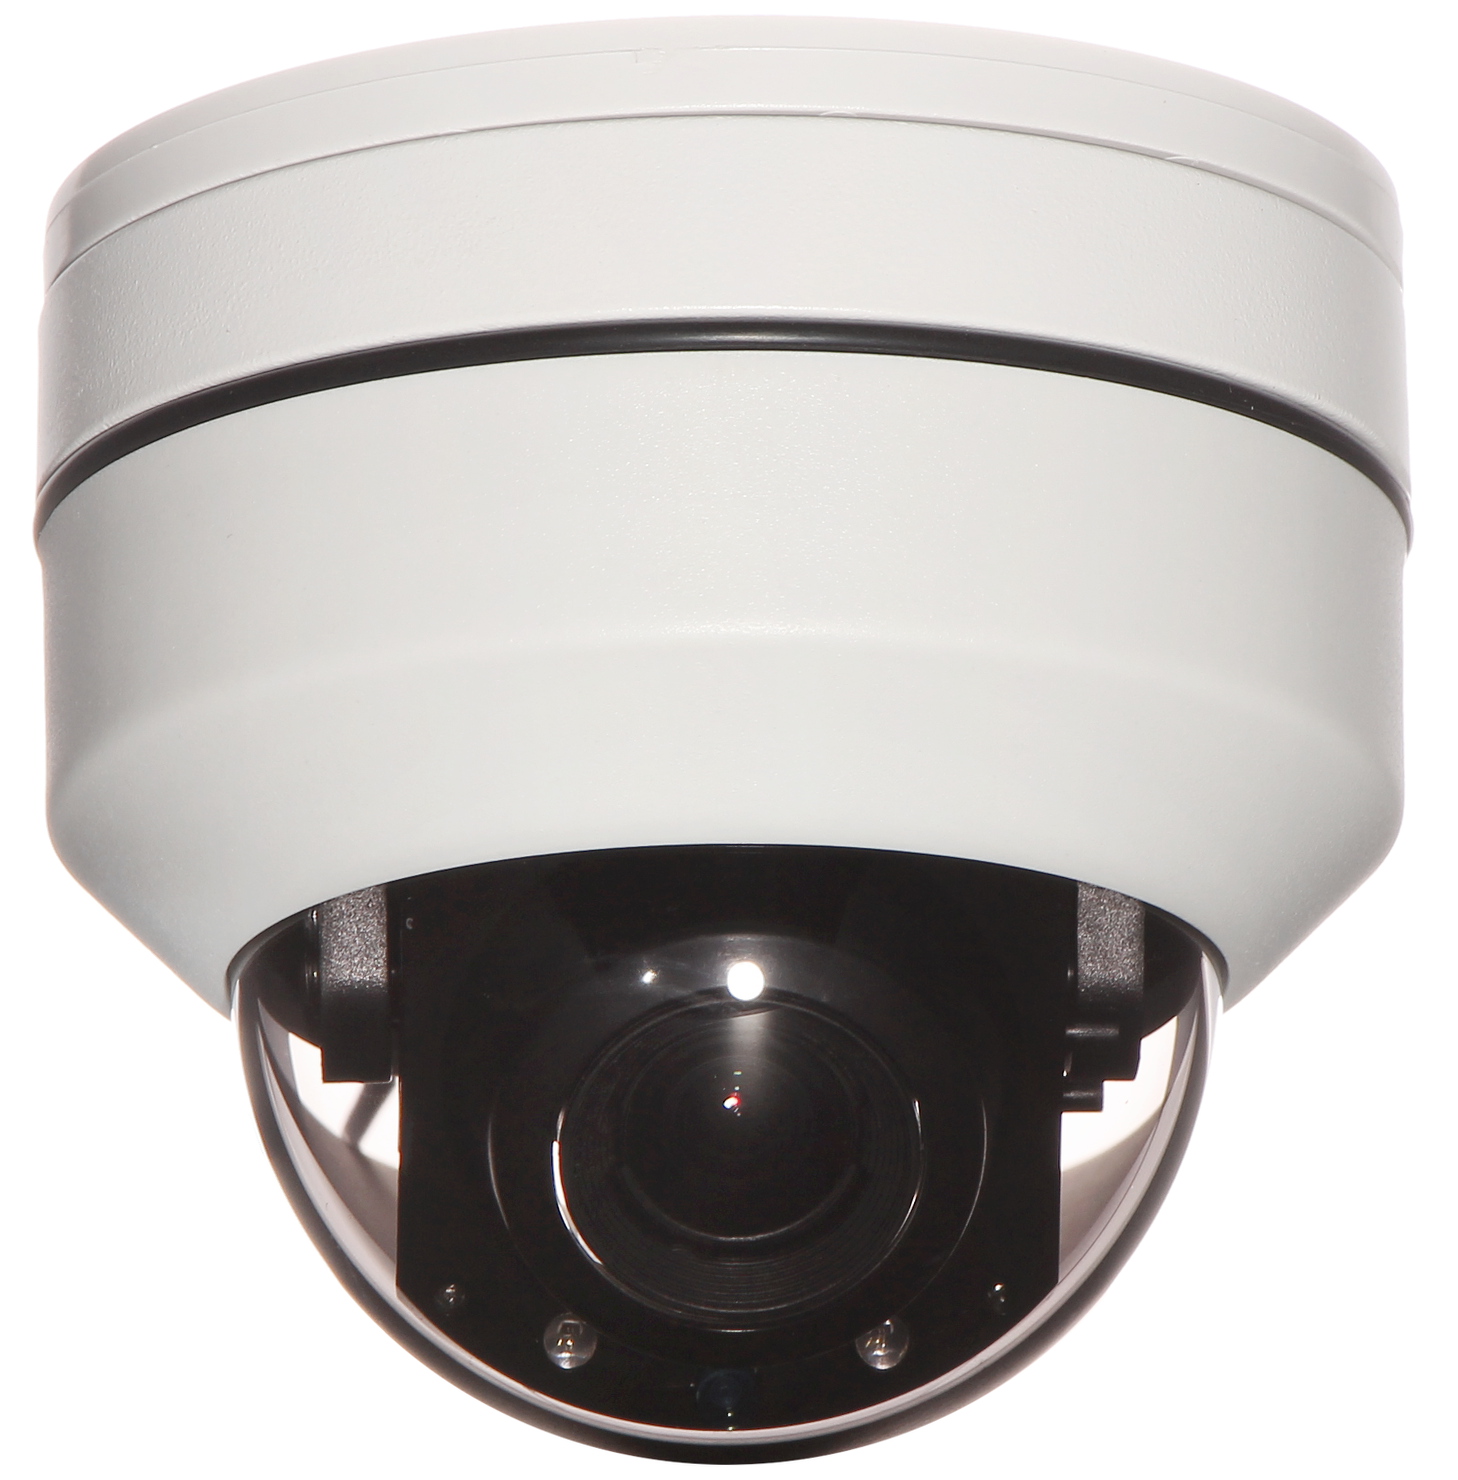 IP SPEED DOME CAMERA OUTDOOR OMEGA-PTZ-21P4-3P 2.1 Mpx... - With an  illuminator range up to 100 m - Delta